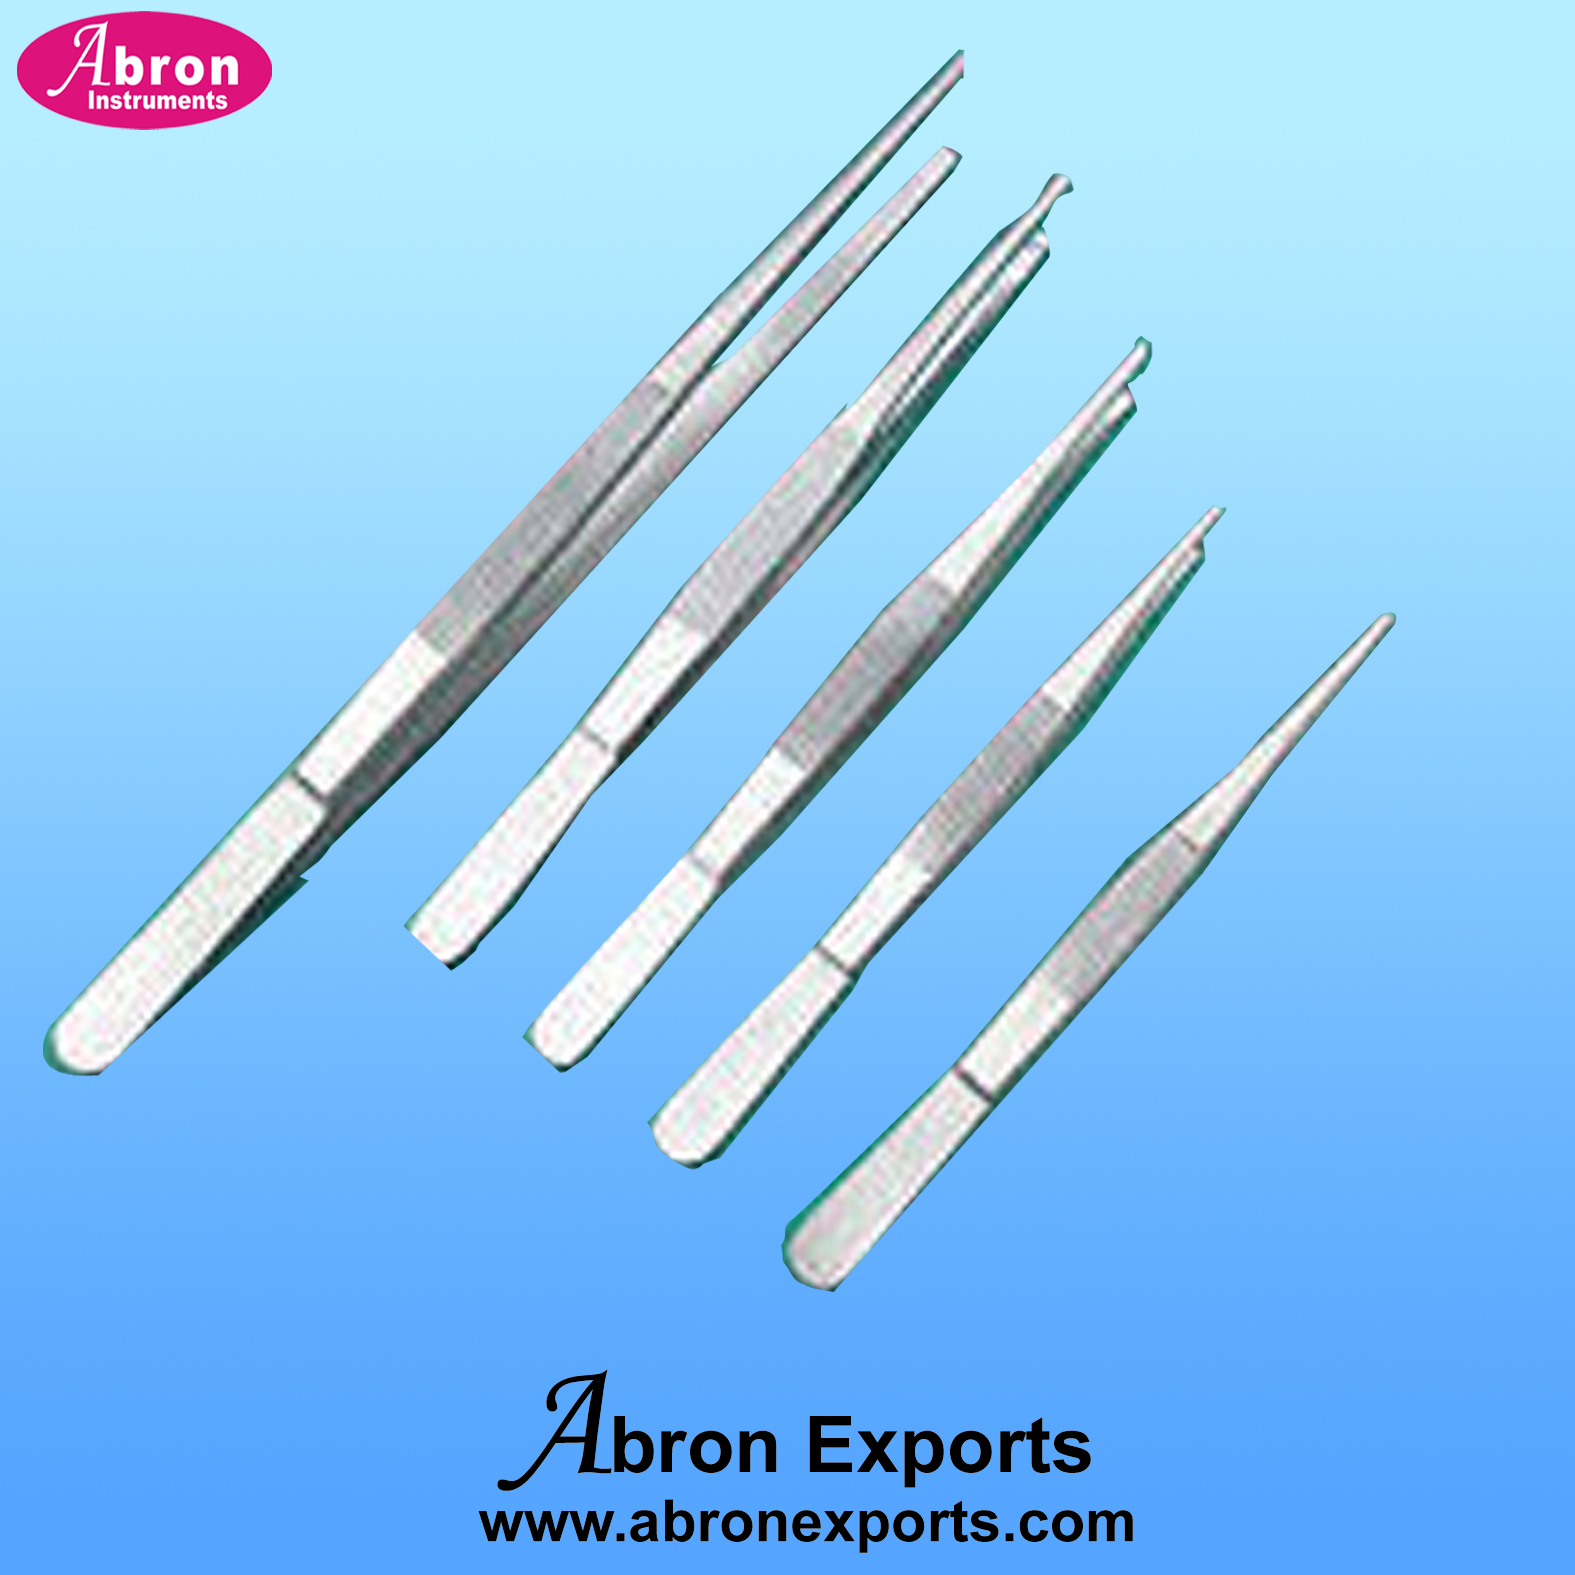 Surgical abron forceps blunt 125mm 150mm 200mm 250mm long ABM-2620-05 